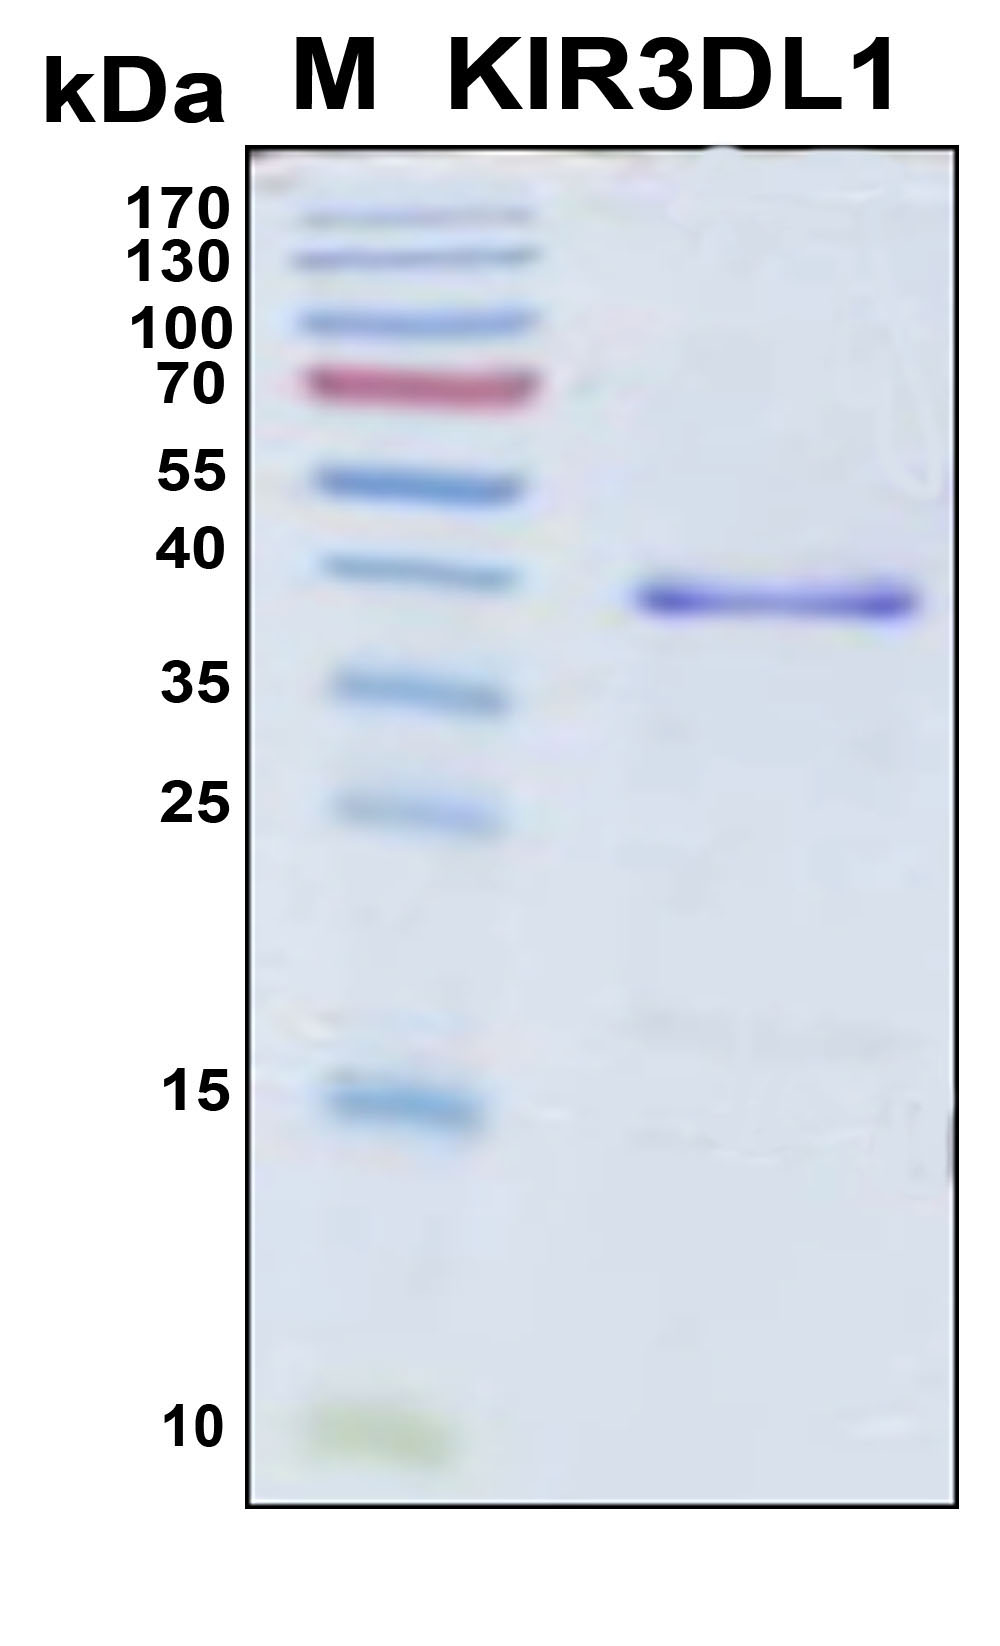 KIR3DL1 Protein - SDS-PAGE under reducing conditions and visualized by Coomassie blue staining